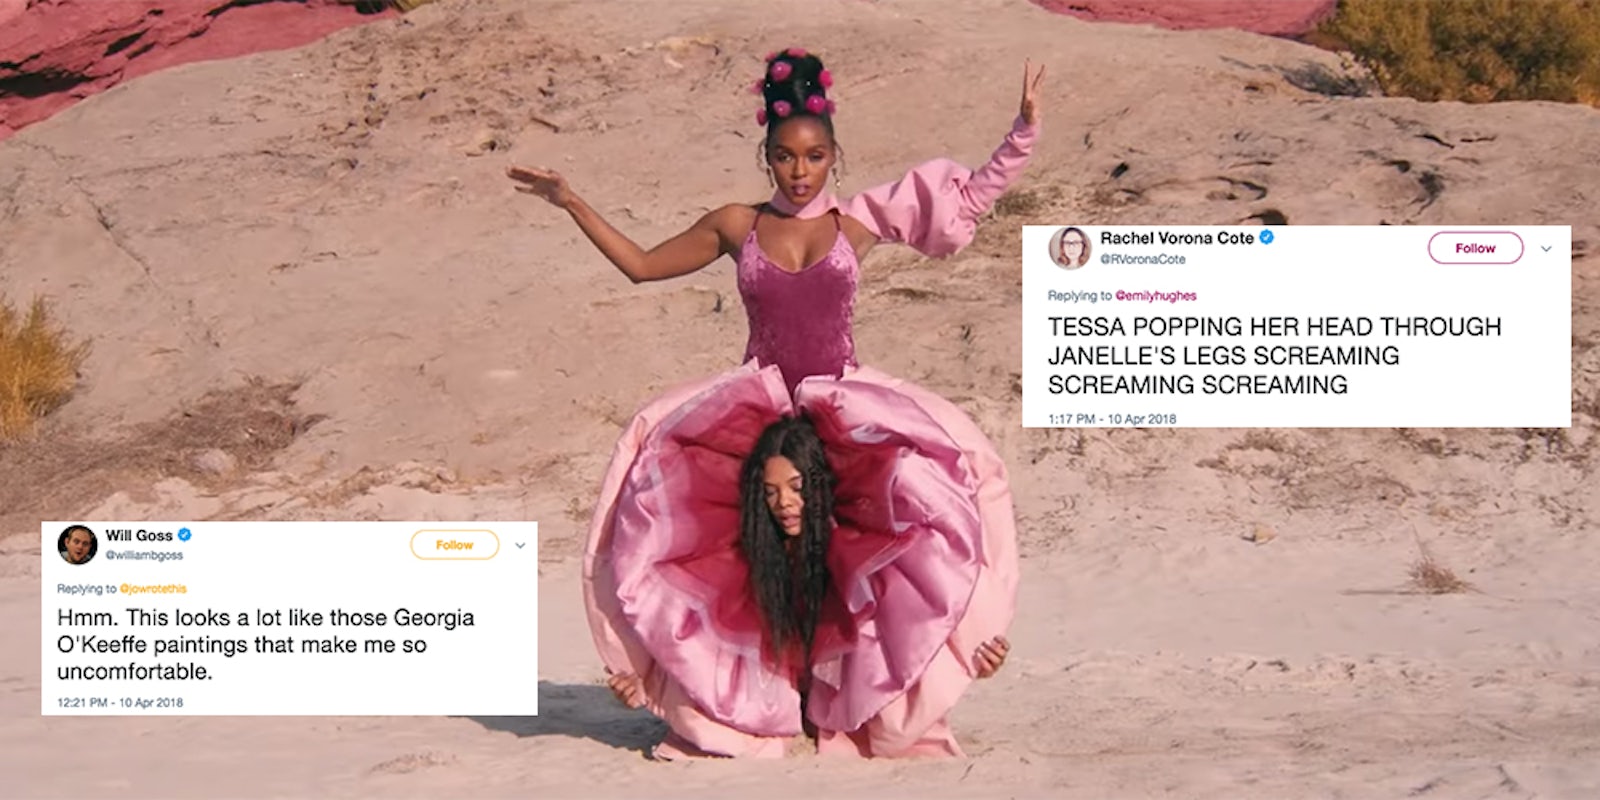 Screengrab from Janelle Monáe's 'PYNK' music video